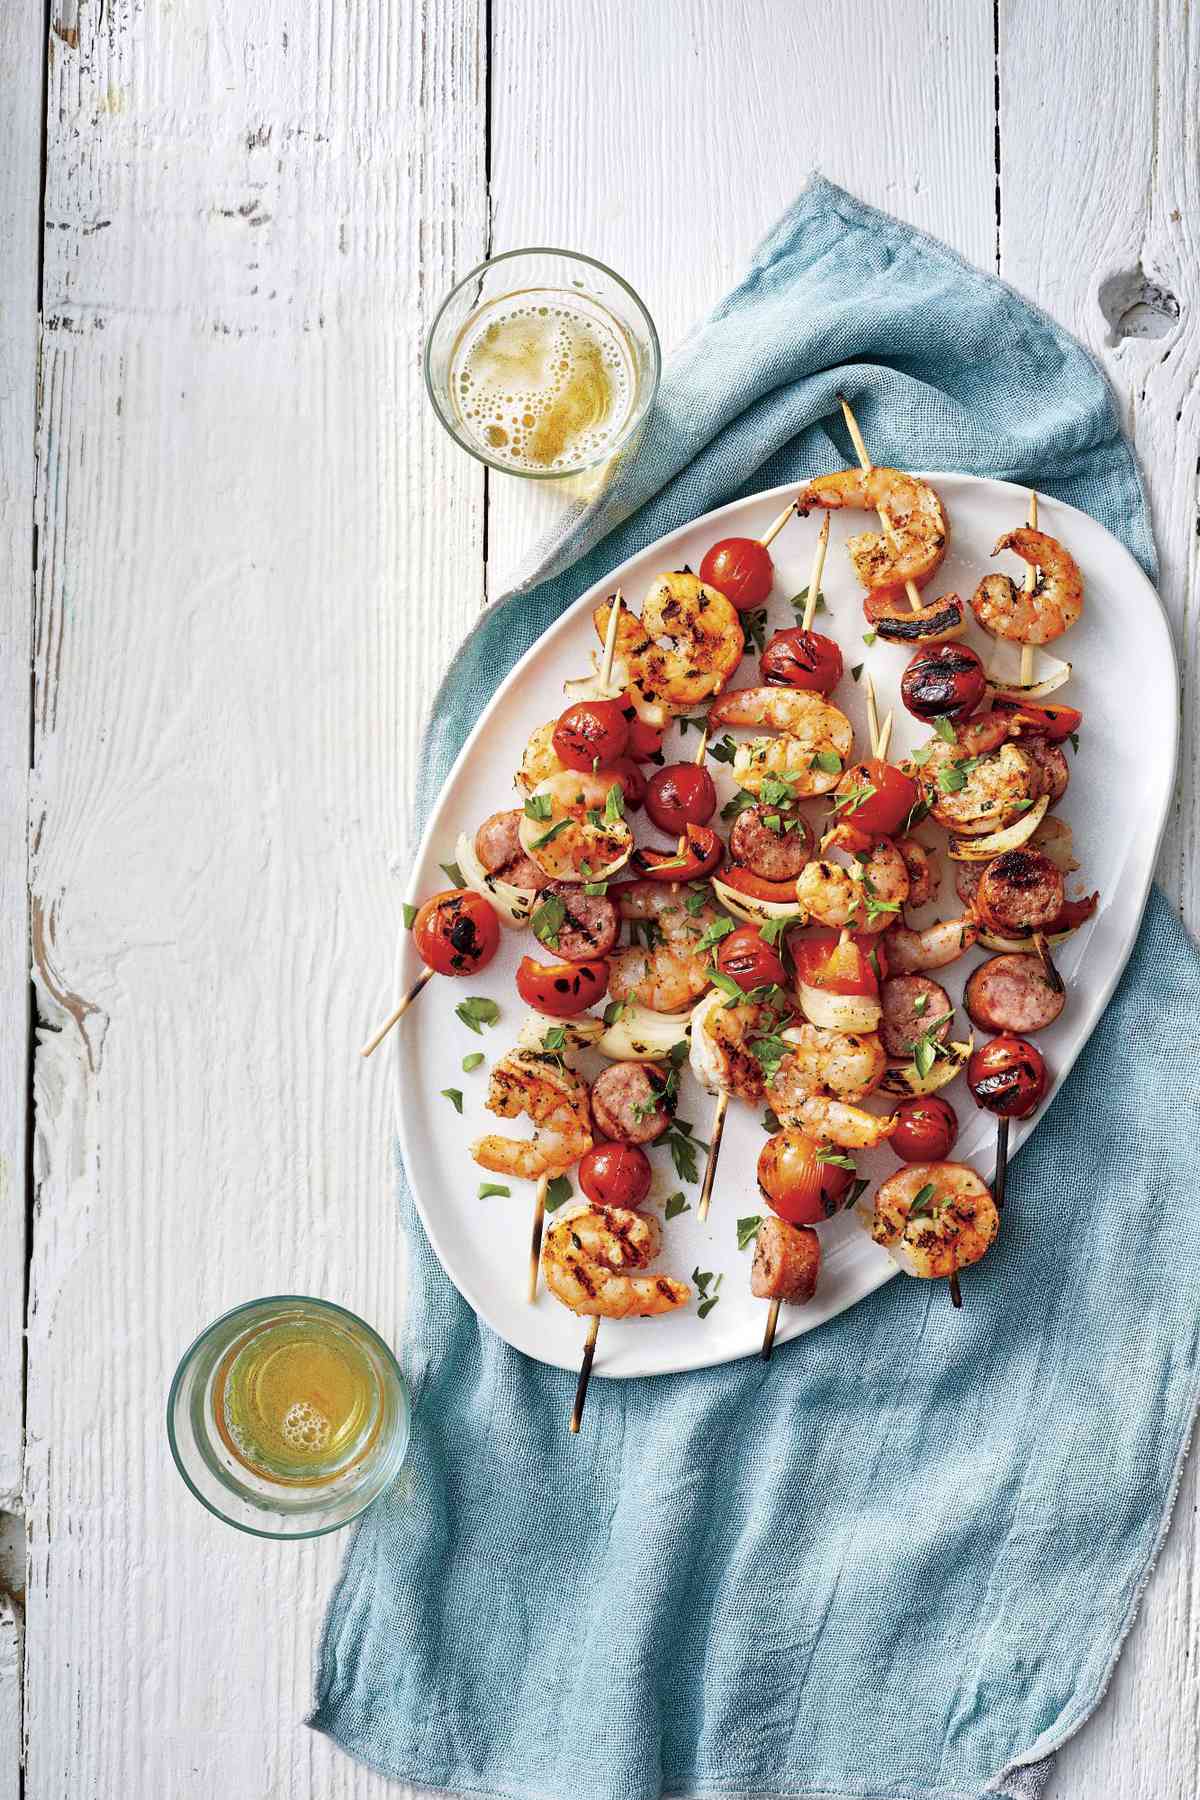 12 Easy Grilled Shrimp Recipes How To Grill Shrimp All Summer Long Southern Living